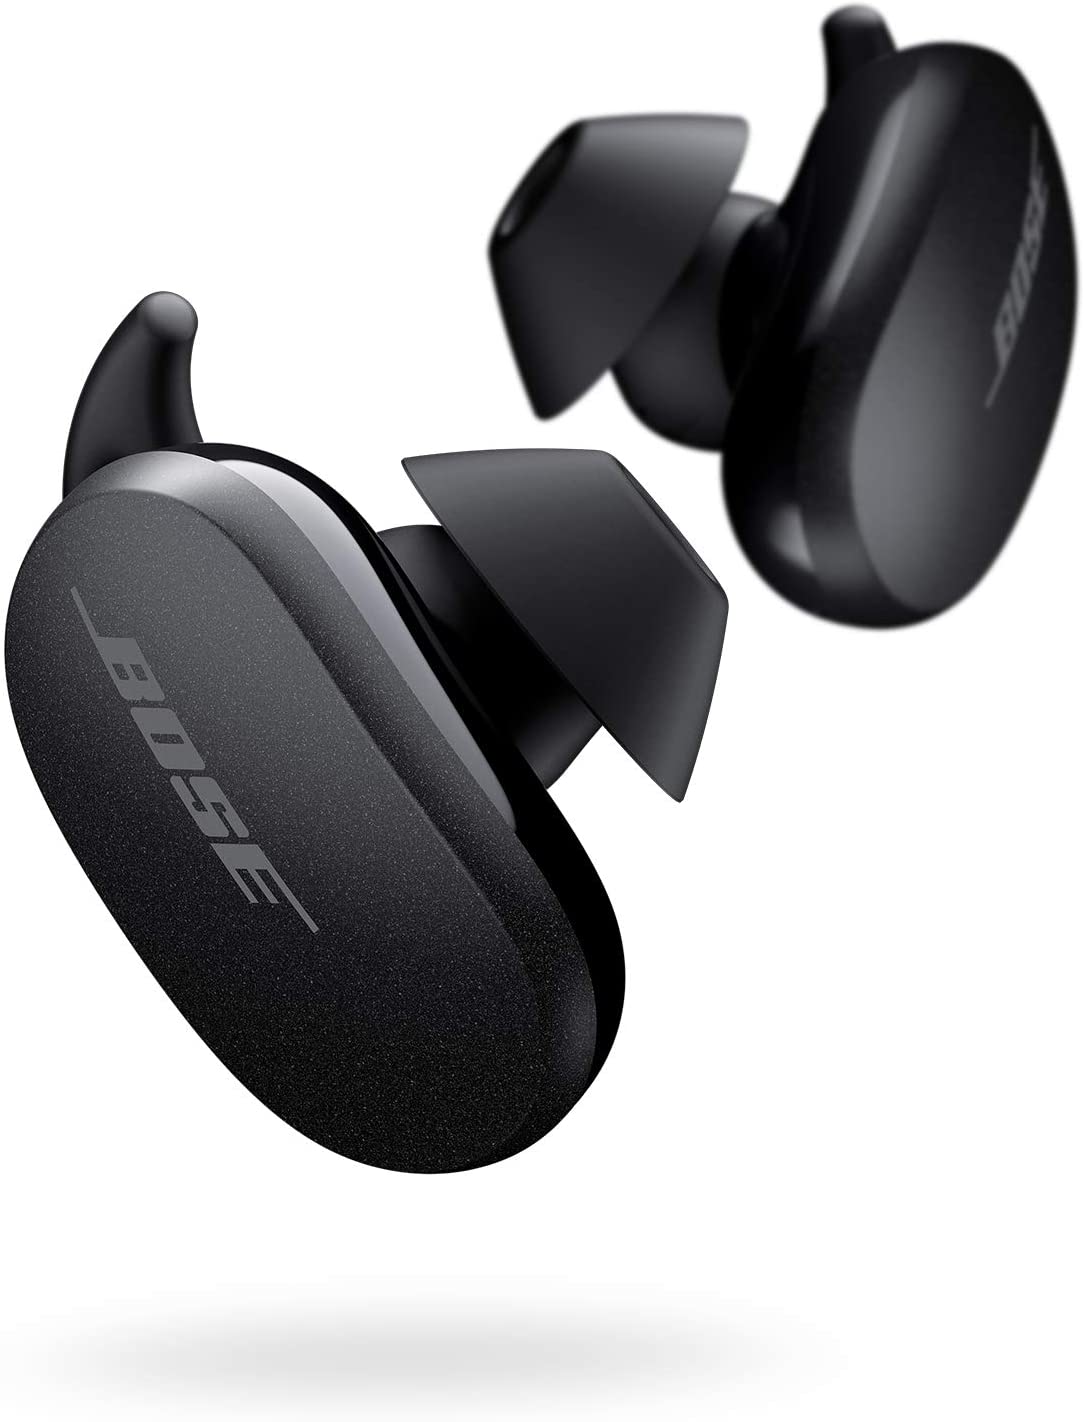 How to Connect Bose Earbuds to iPhone, Android, Mac, and PC